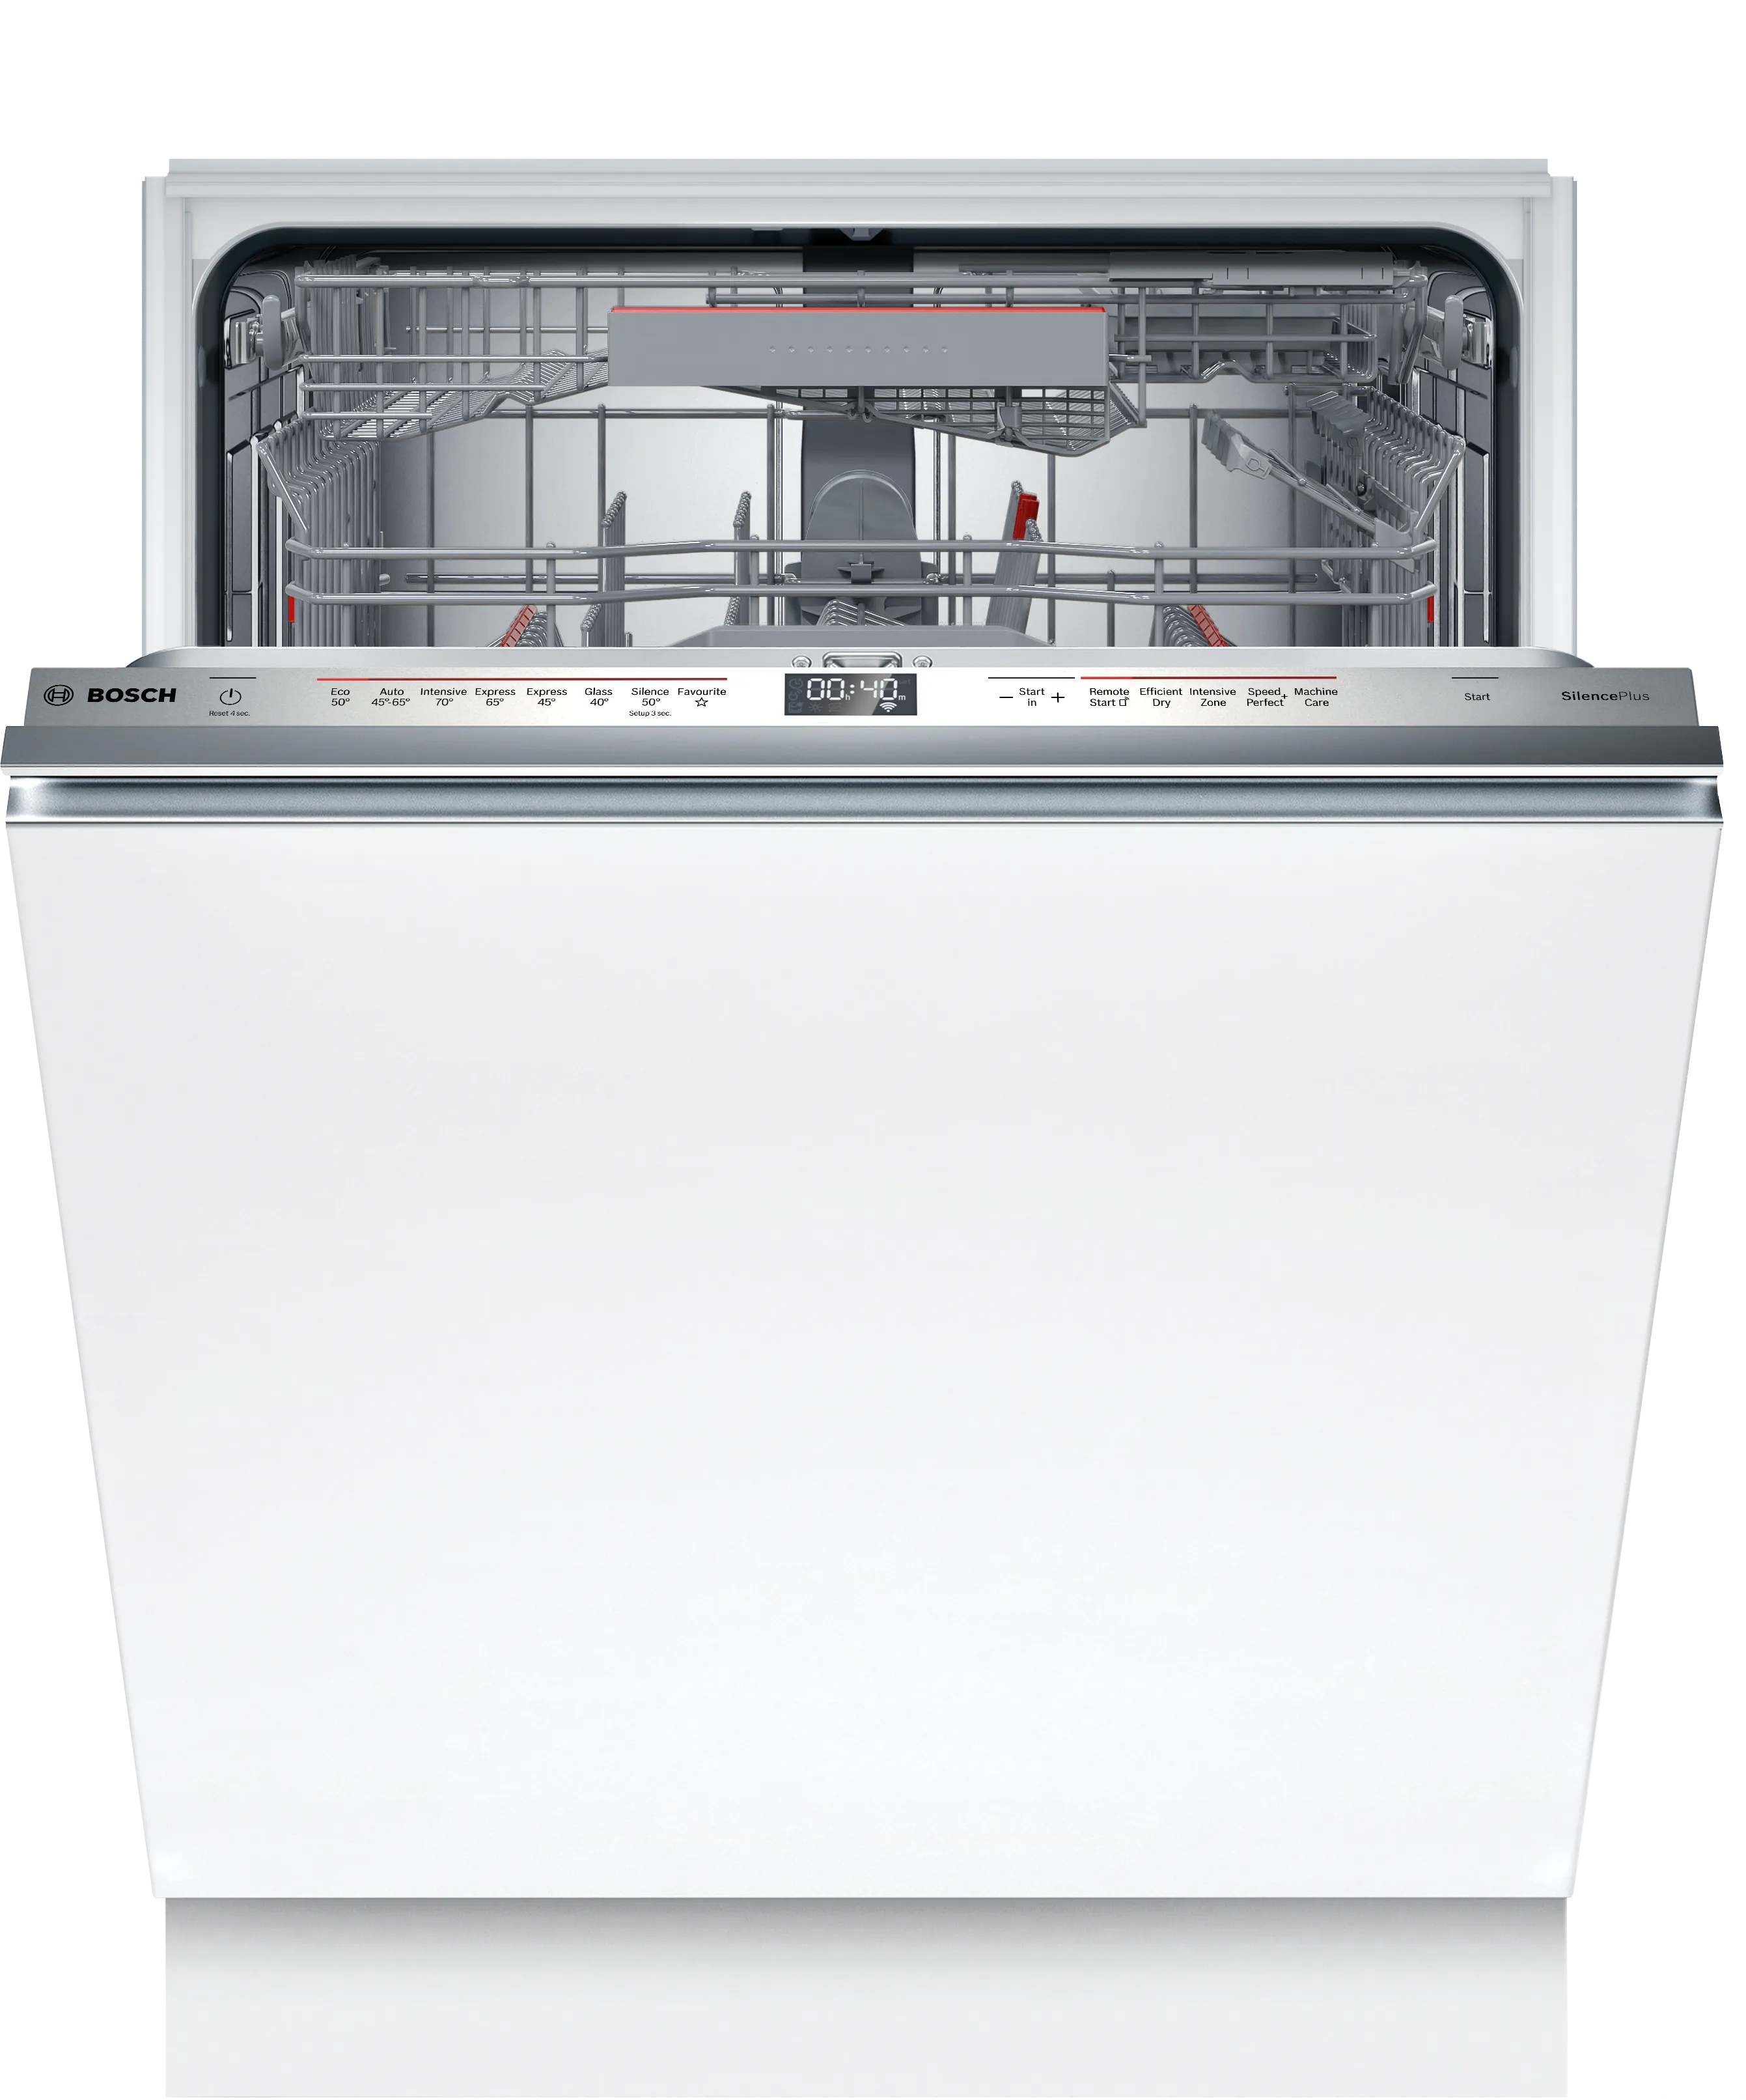 Series 6 fully-integrated dishwasher 60 cm 